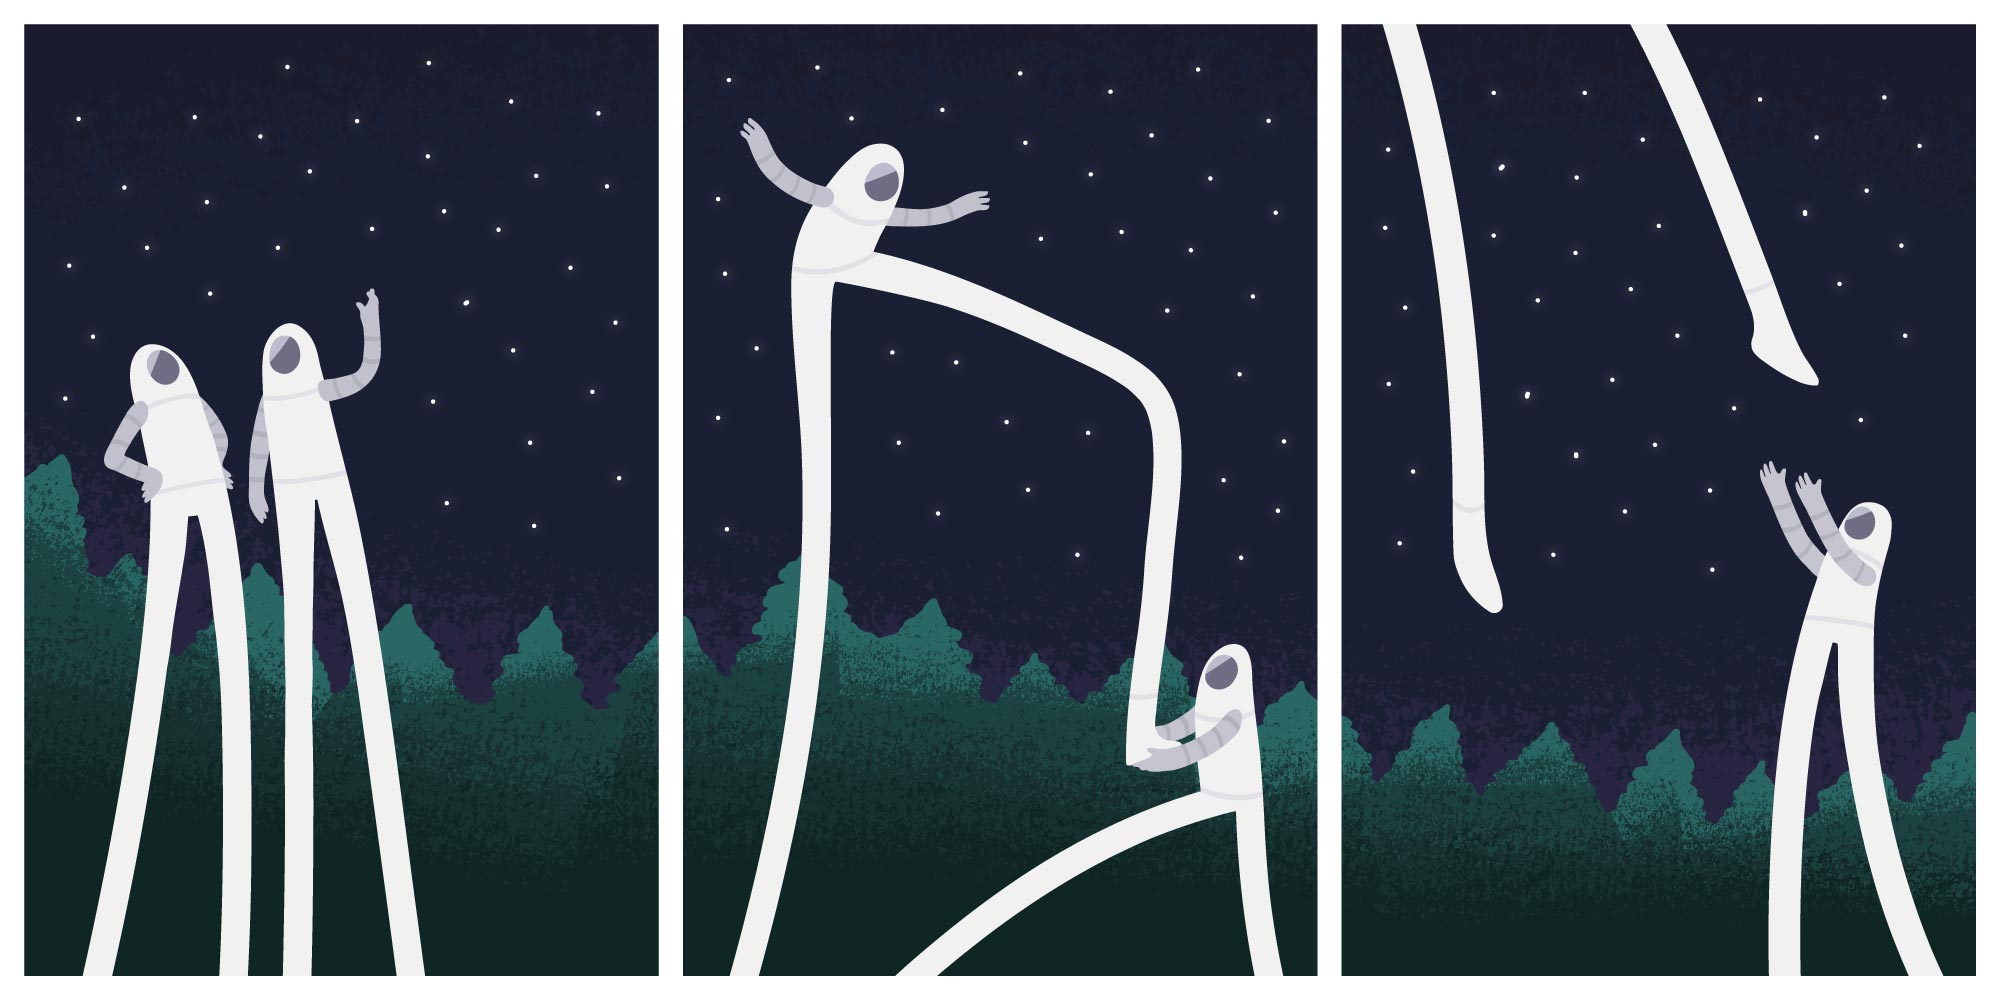 Triptych illustration of spacemen with ridiculously long legs throwing each other into space.